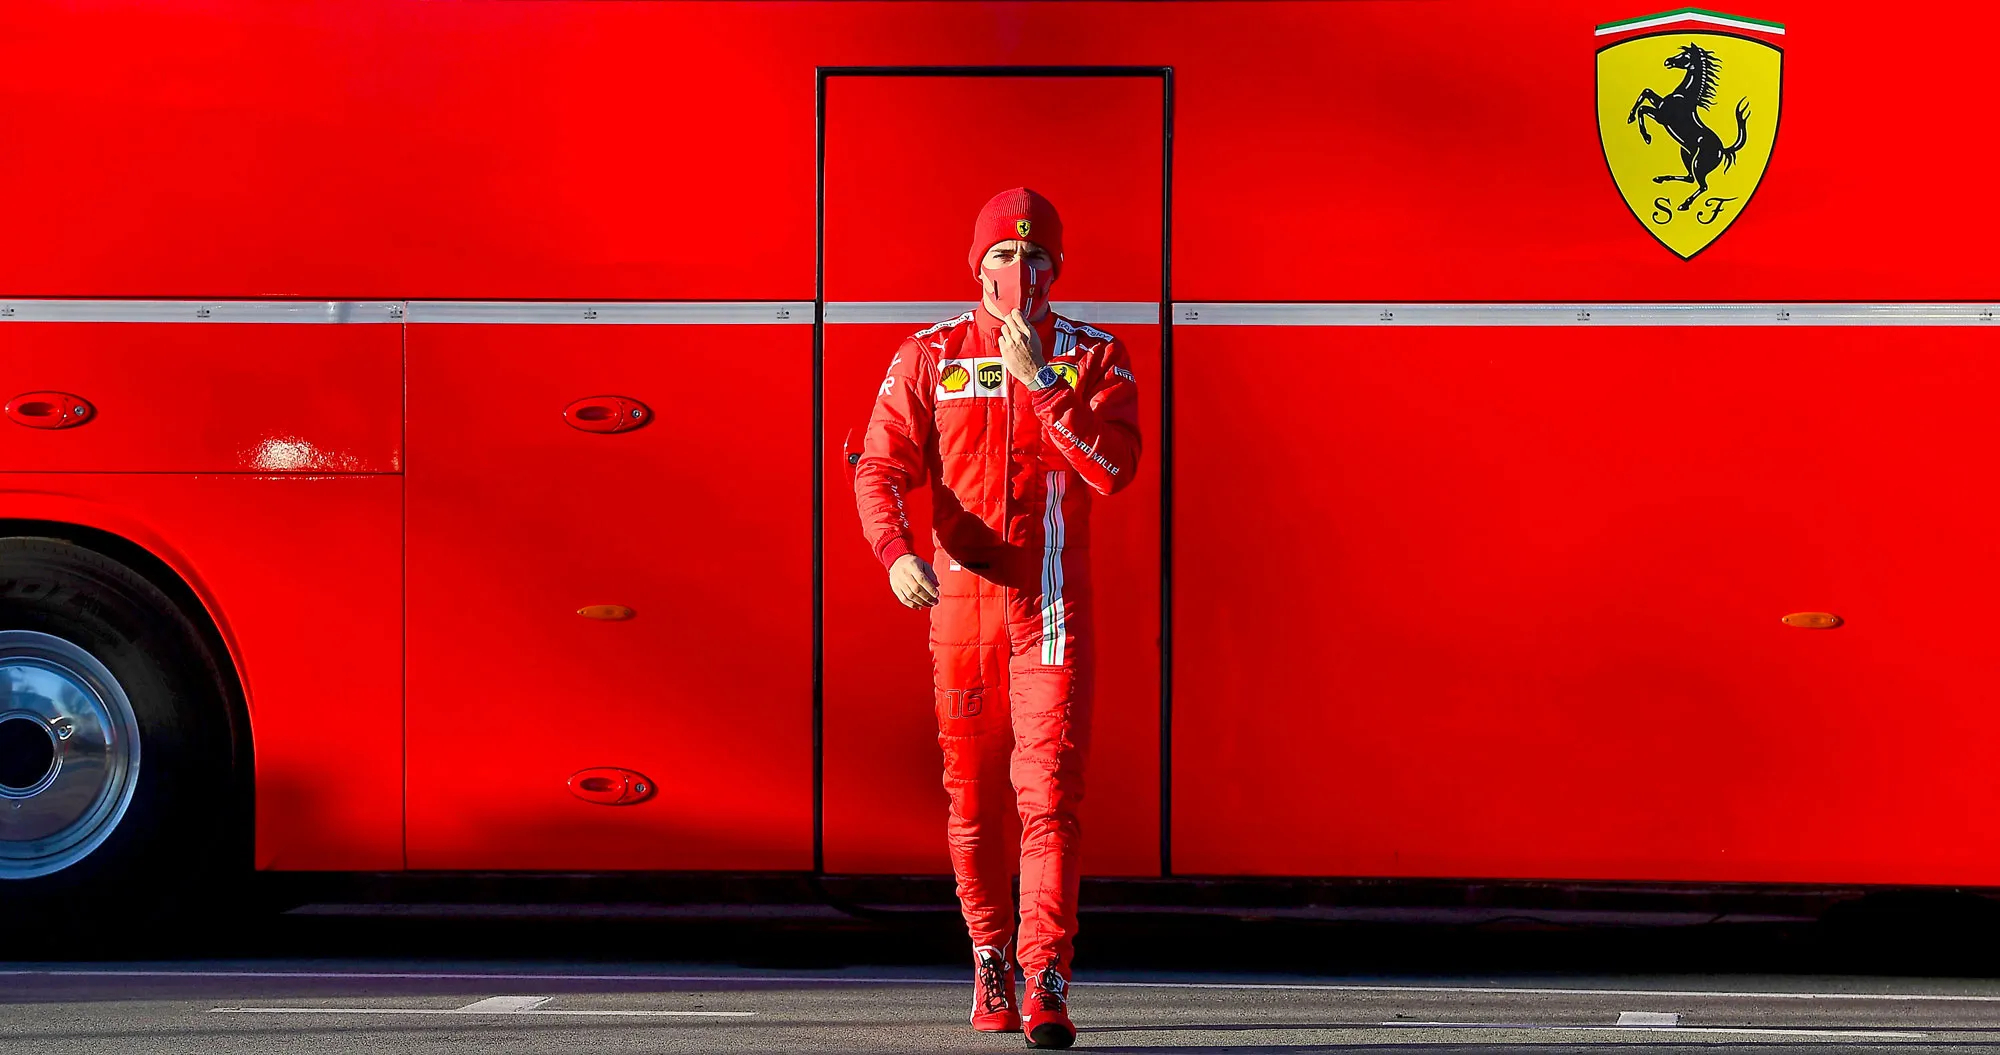 In 2021 Ferrari announces a multi-year partnership agreement with Richard Mille. 